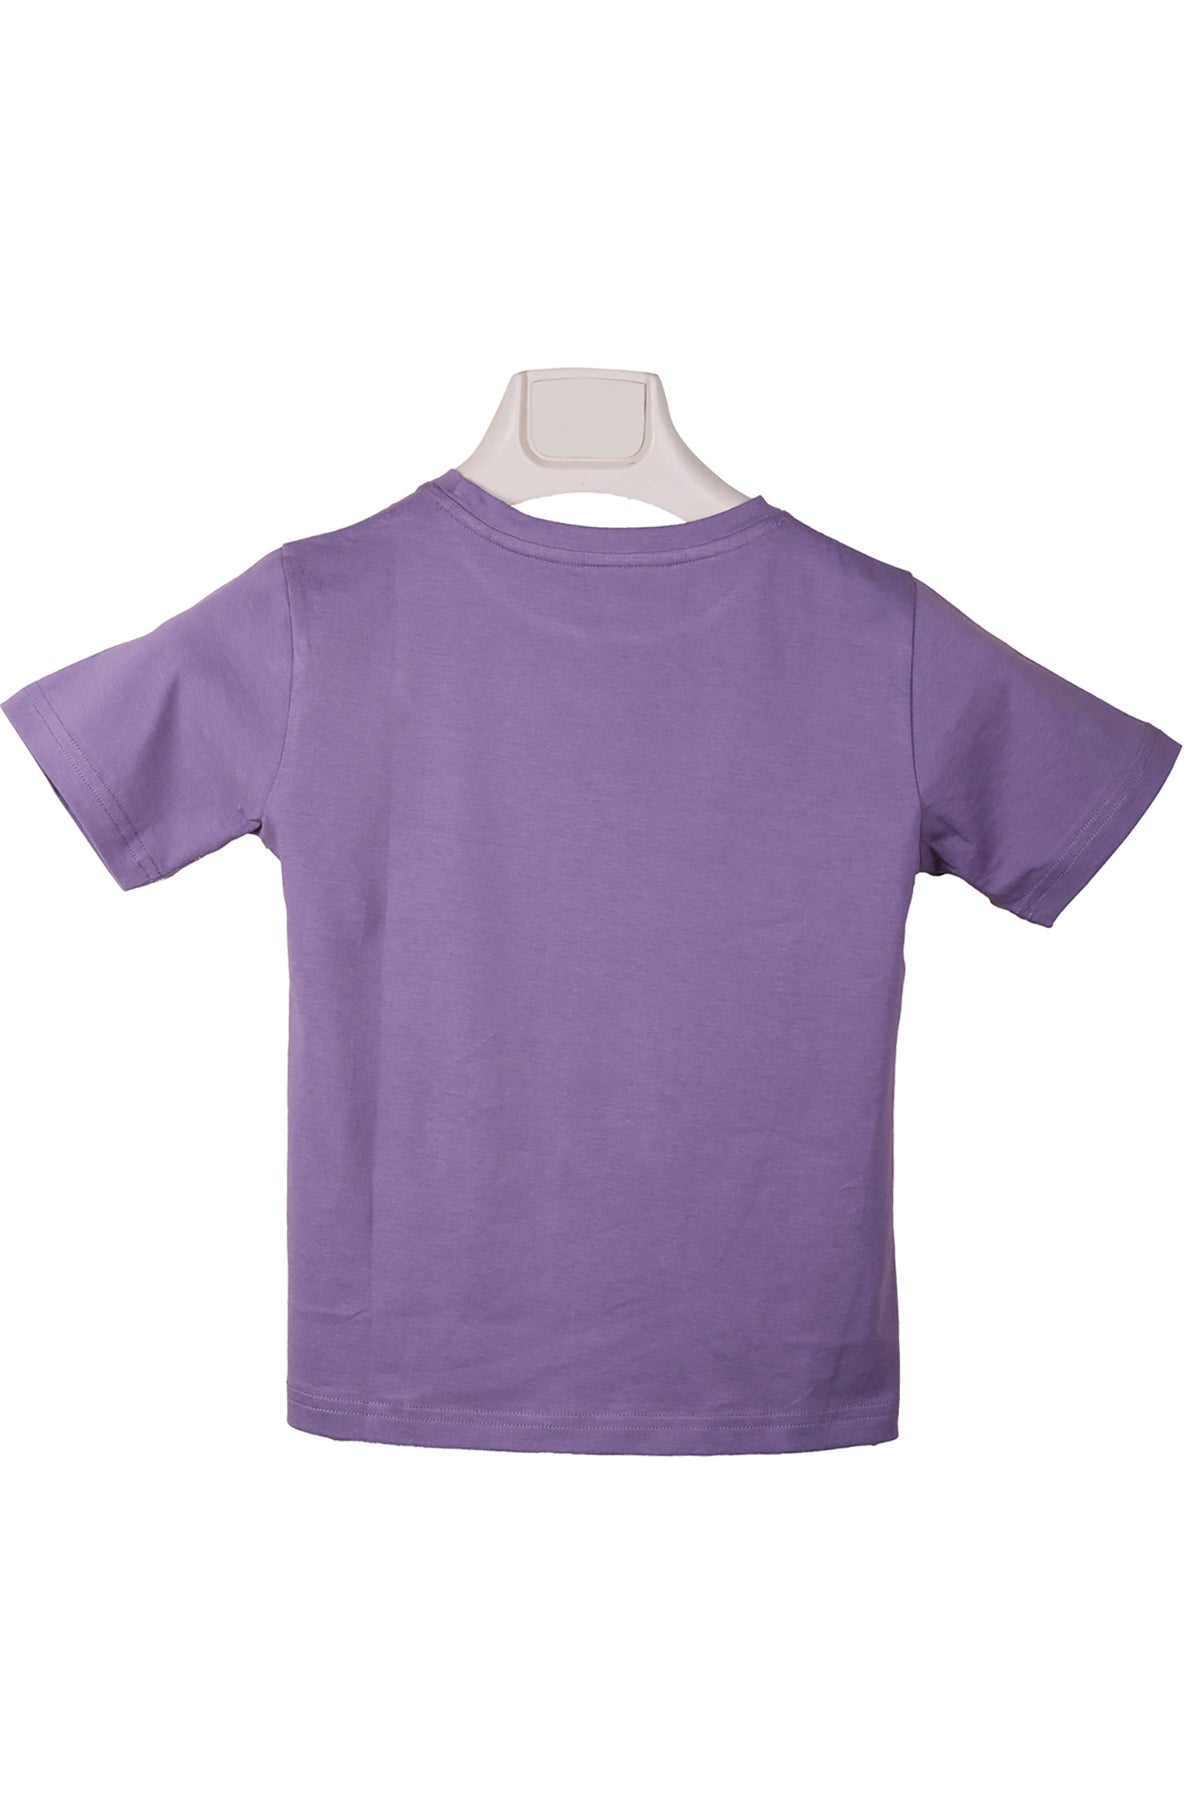 Be Kind To Every Kind Purple T-Shirt For Boys